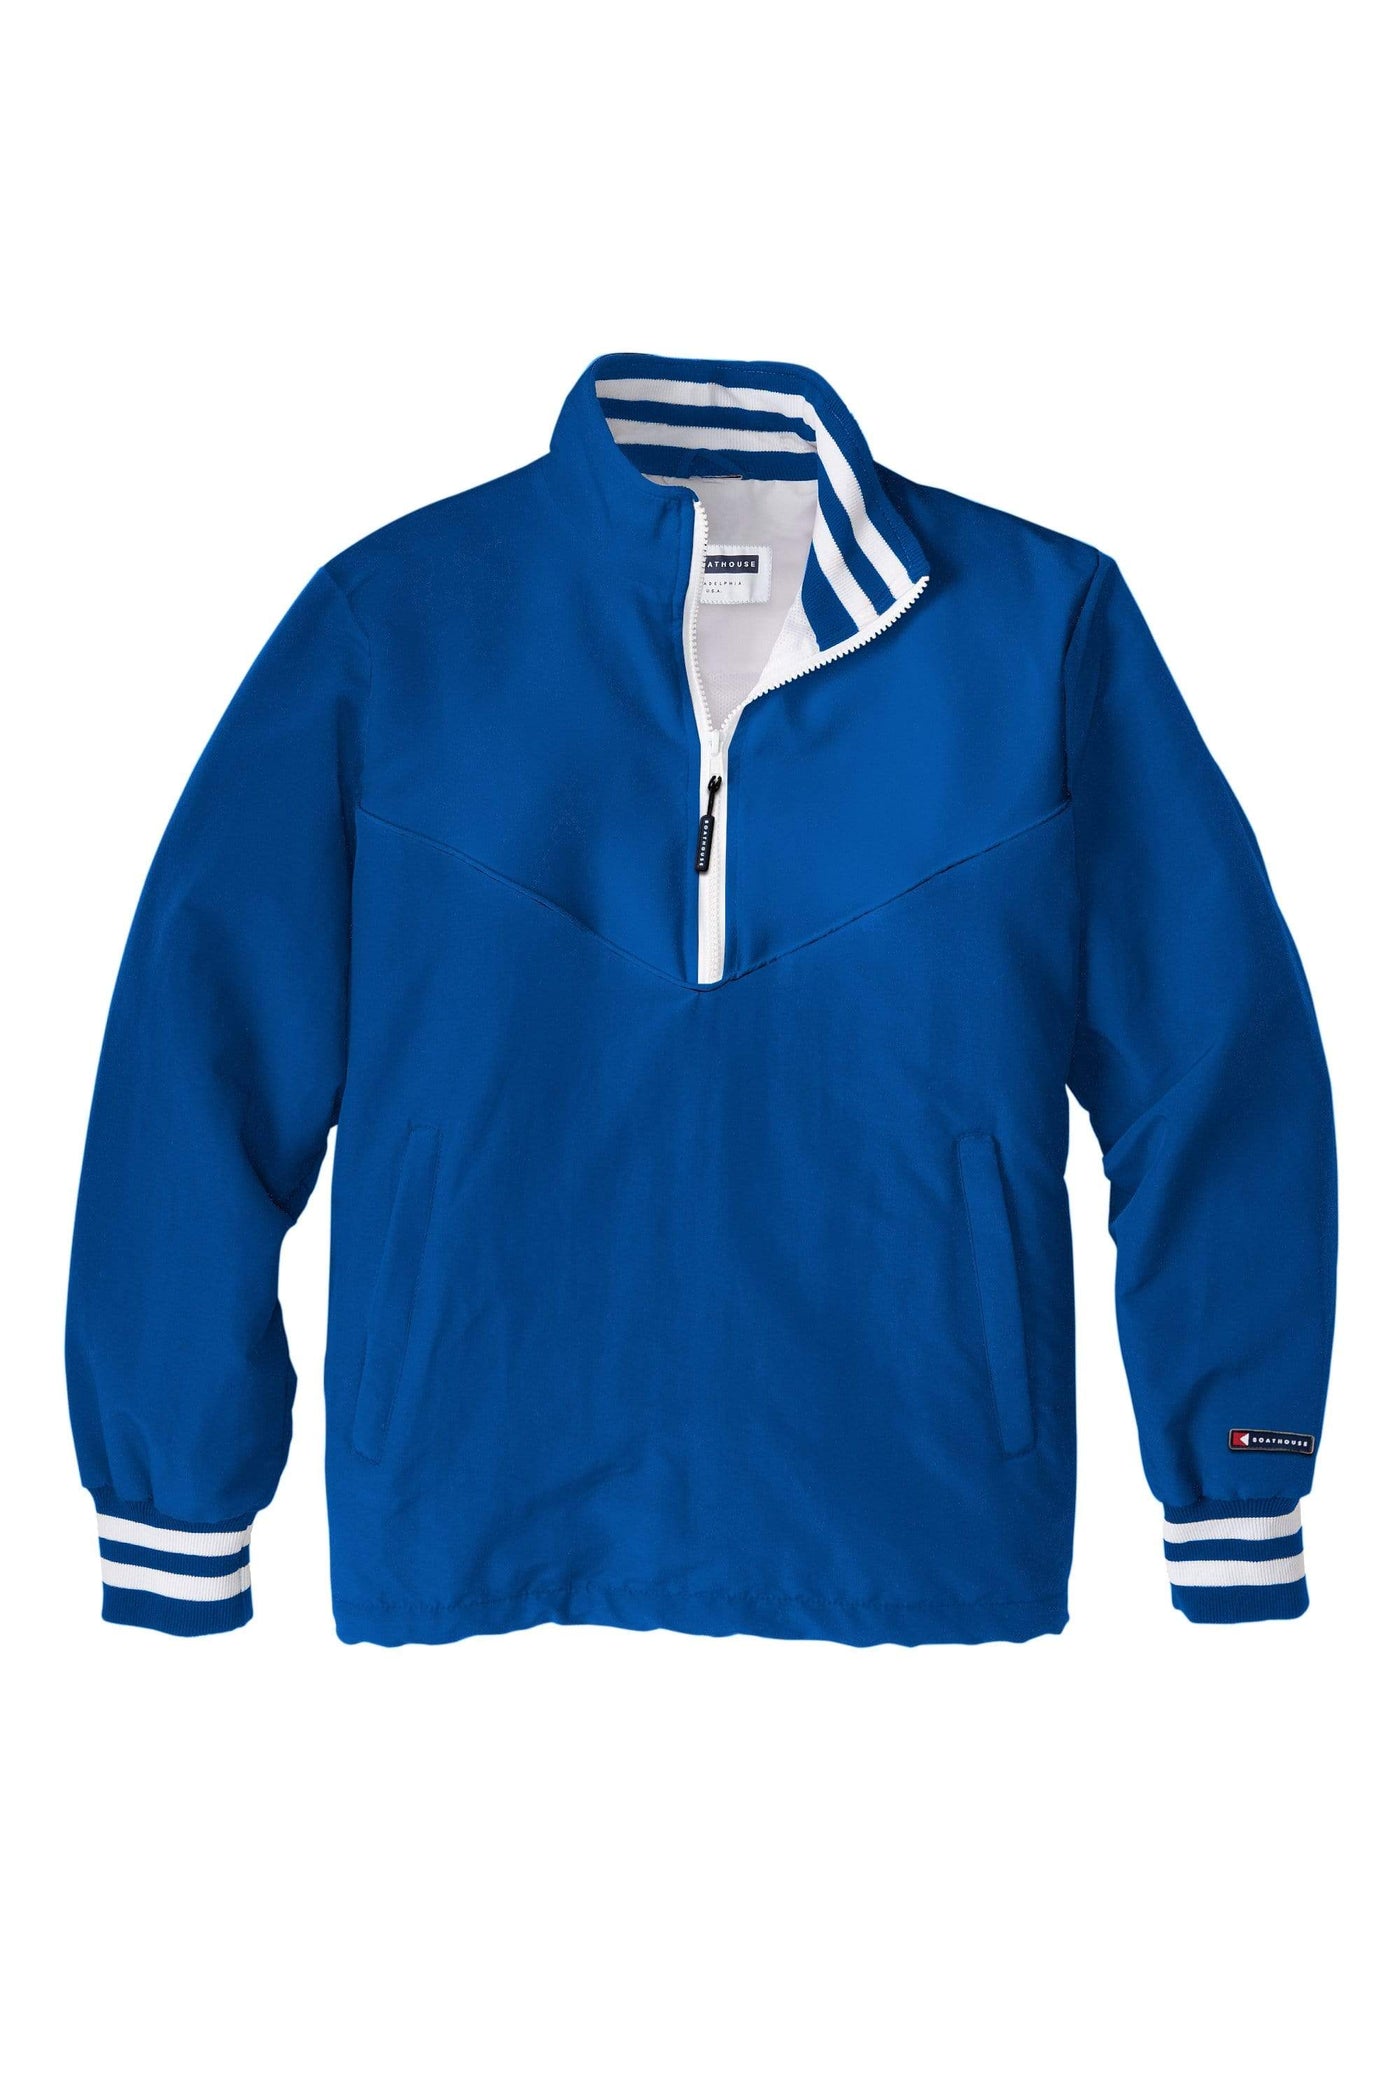 BOATHOUSE The Women's Mission Pullover Royal / X-Small